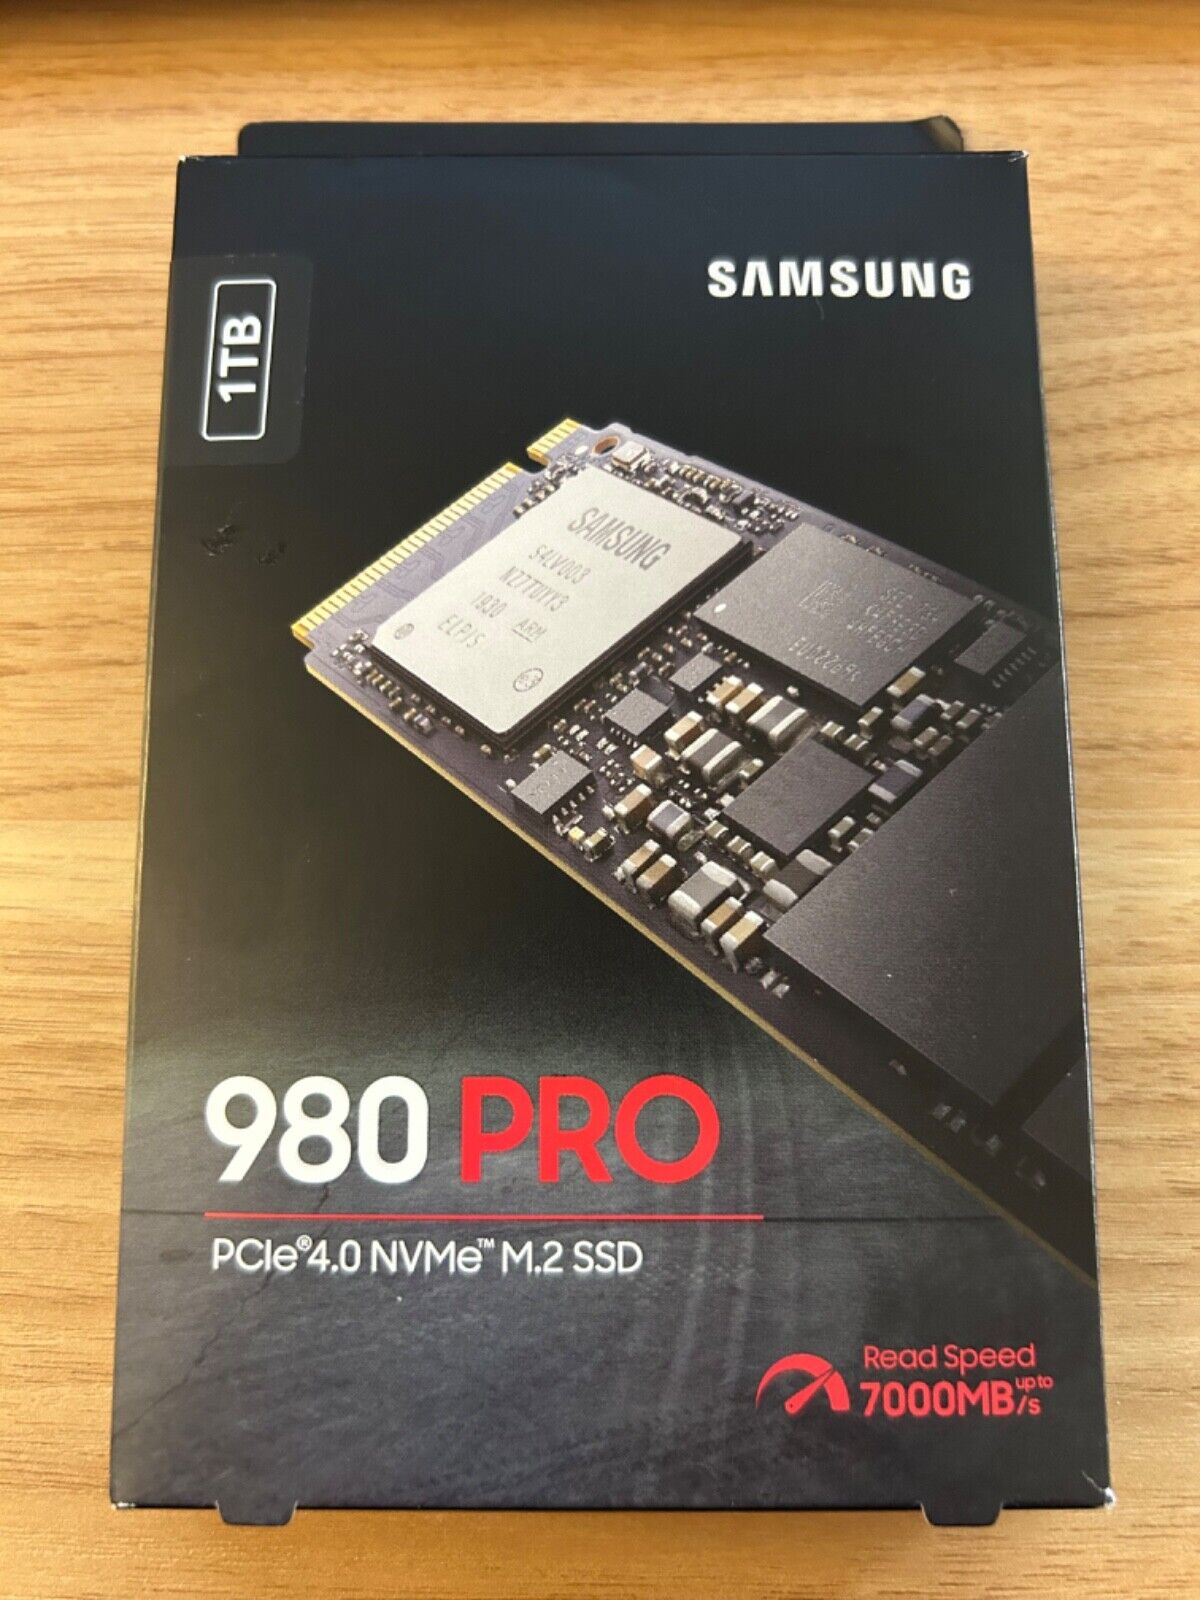 Samsung 980 PRO 1TB SSD, PCIe 4.0 NVMe M.2  Internal Solid State Drive